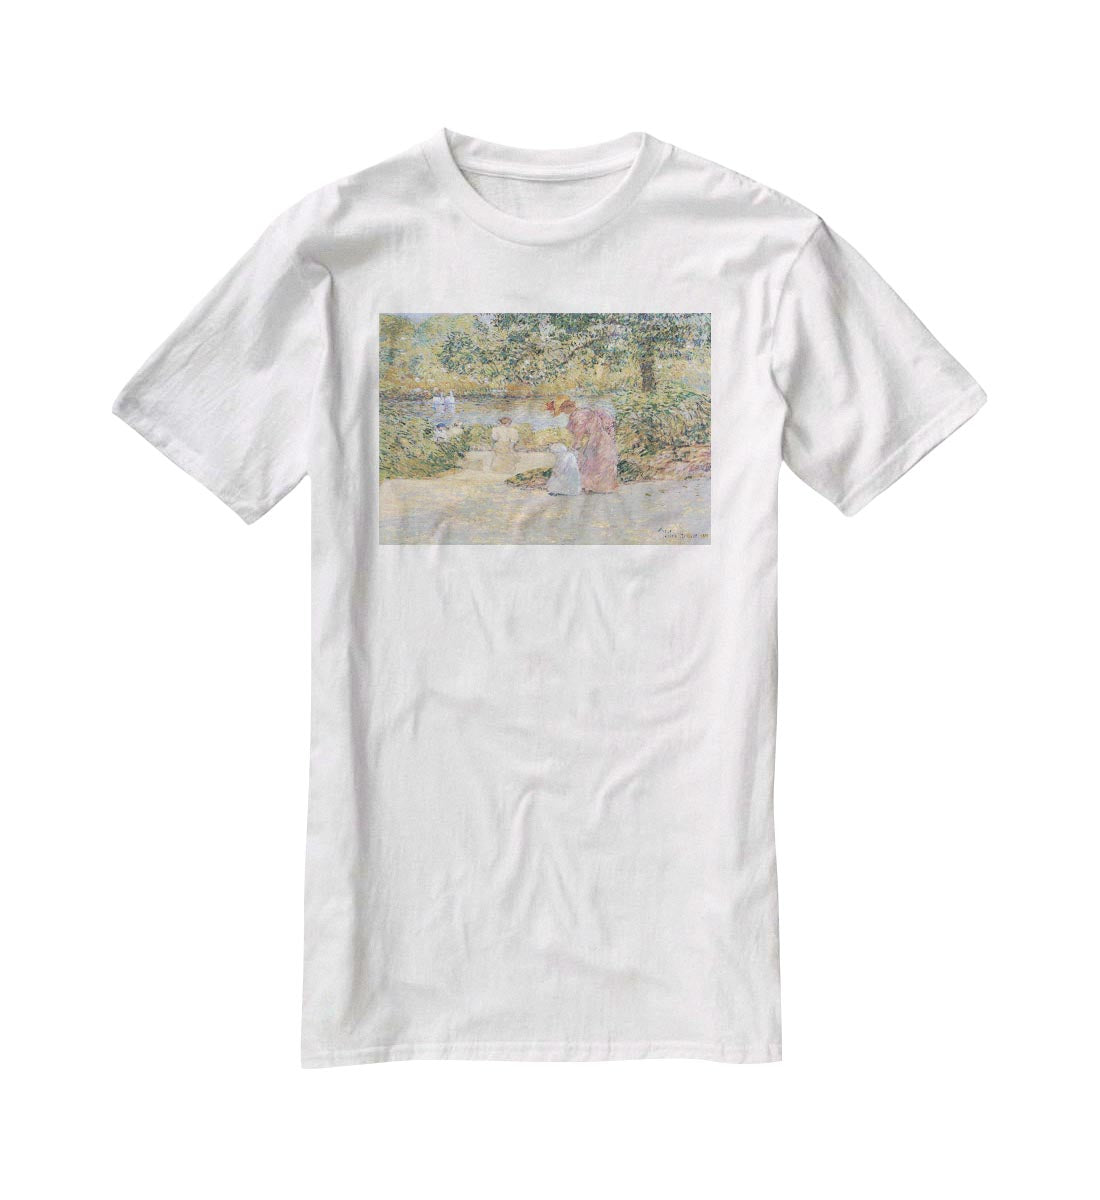 The staircase at Central Park by Hassam T-Shirt - Canvas Art Rocks - 5